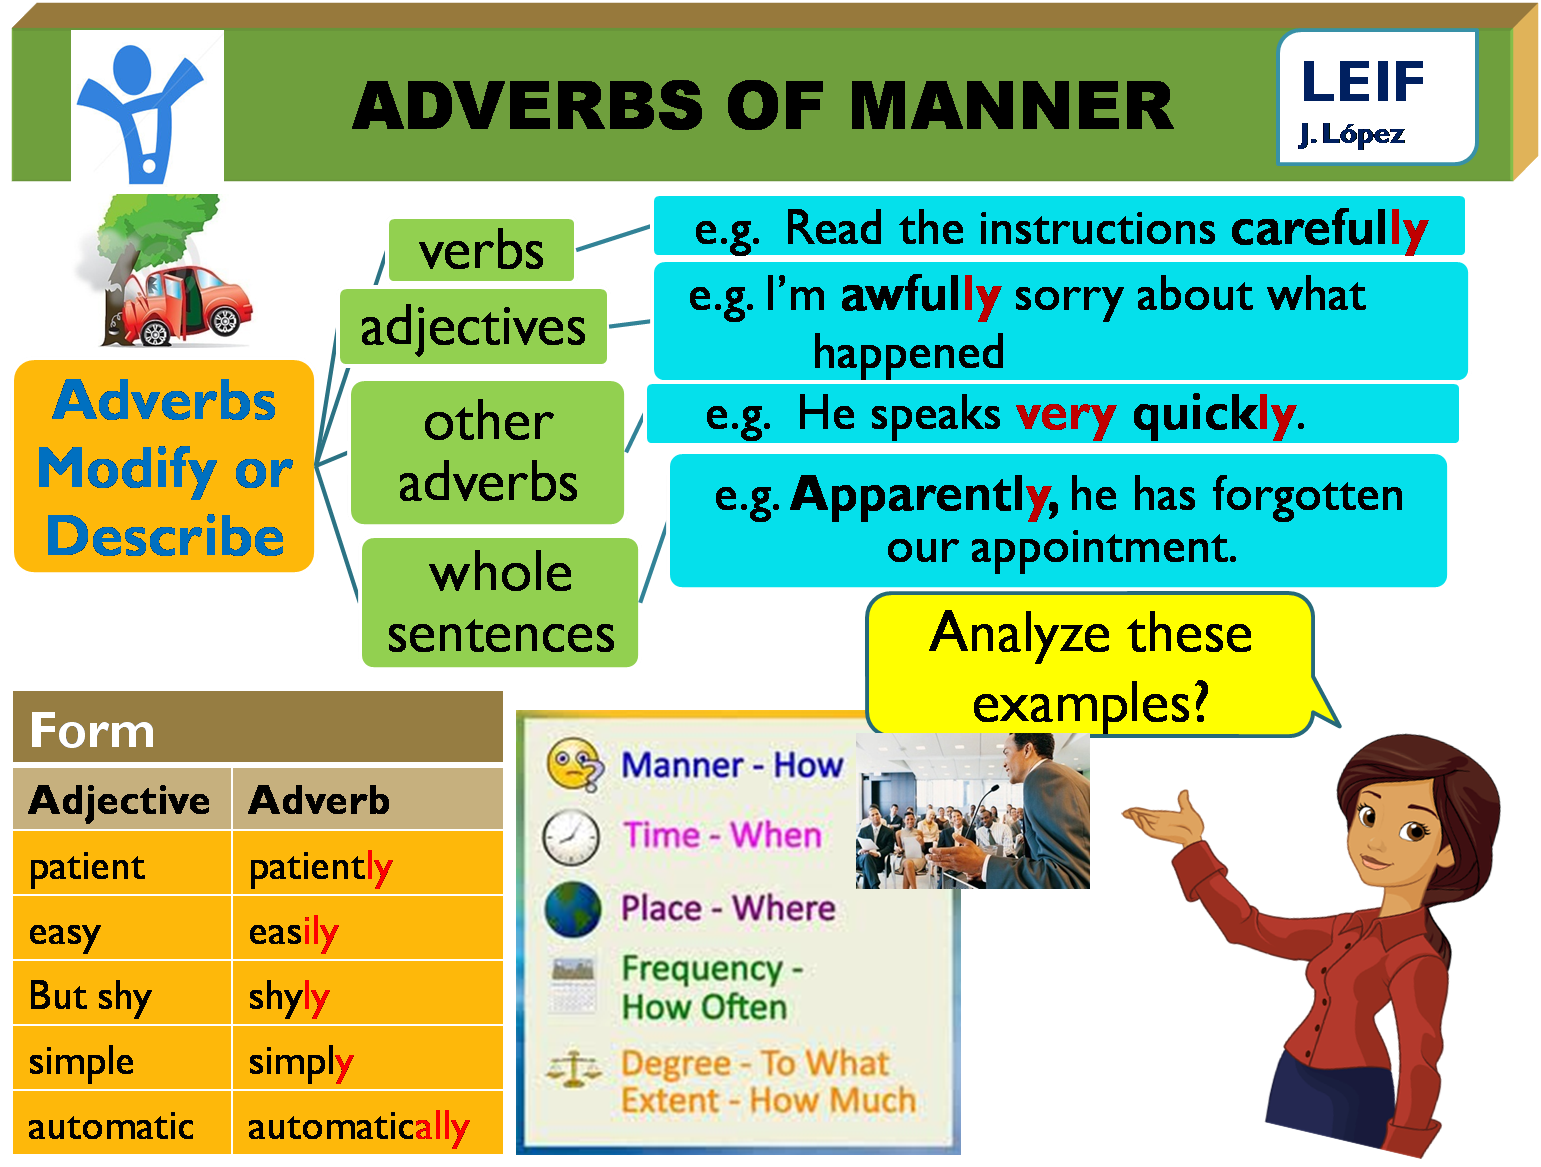 Adverbs of manner список. Adverbs of manner правило. Adverbs of manner в английском языке. Adverbs правило. Complete the text with the adjectives